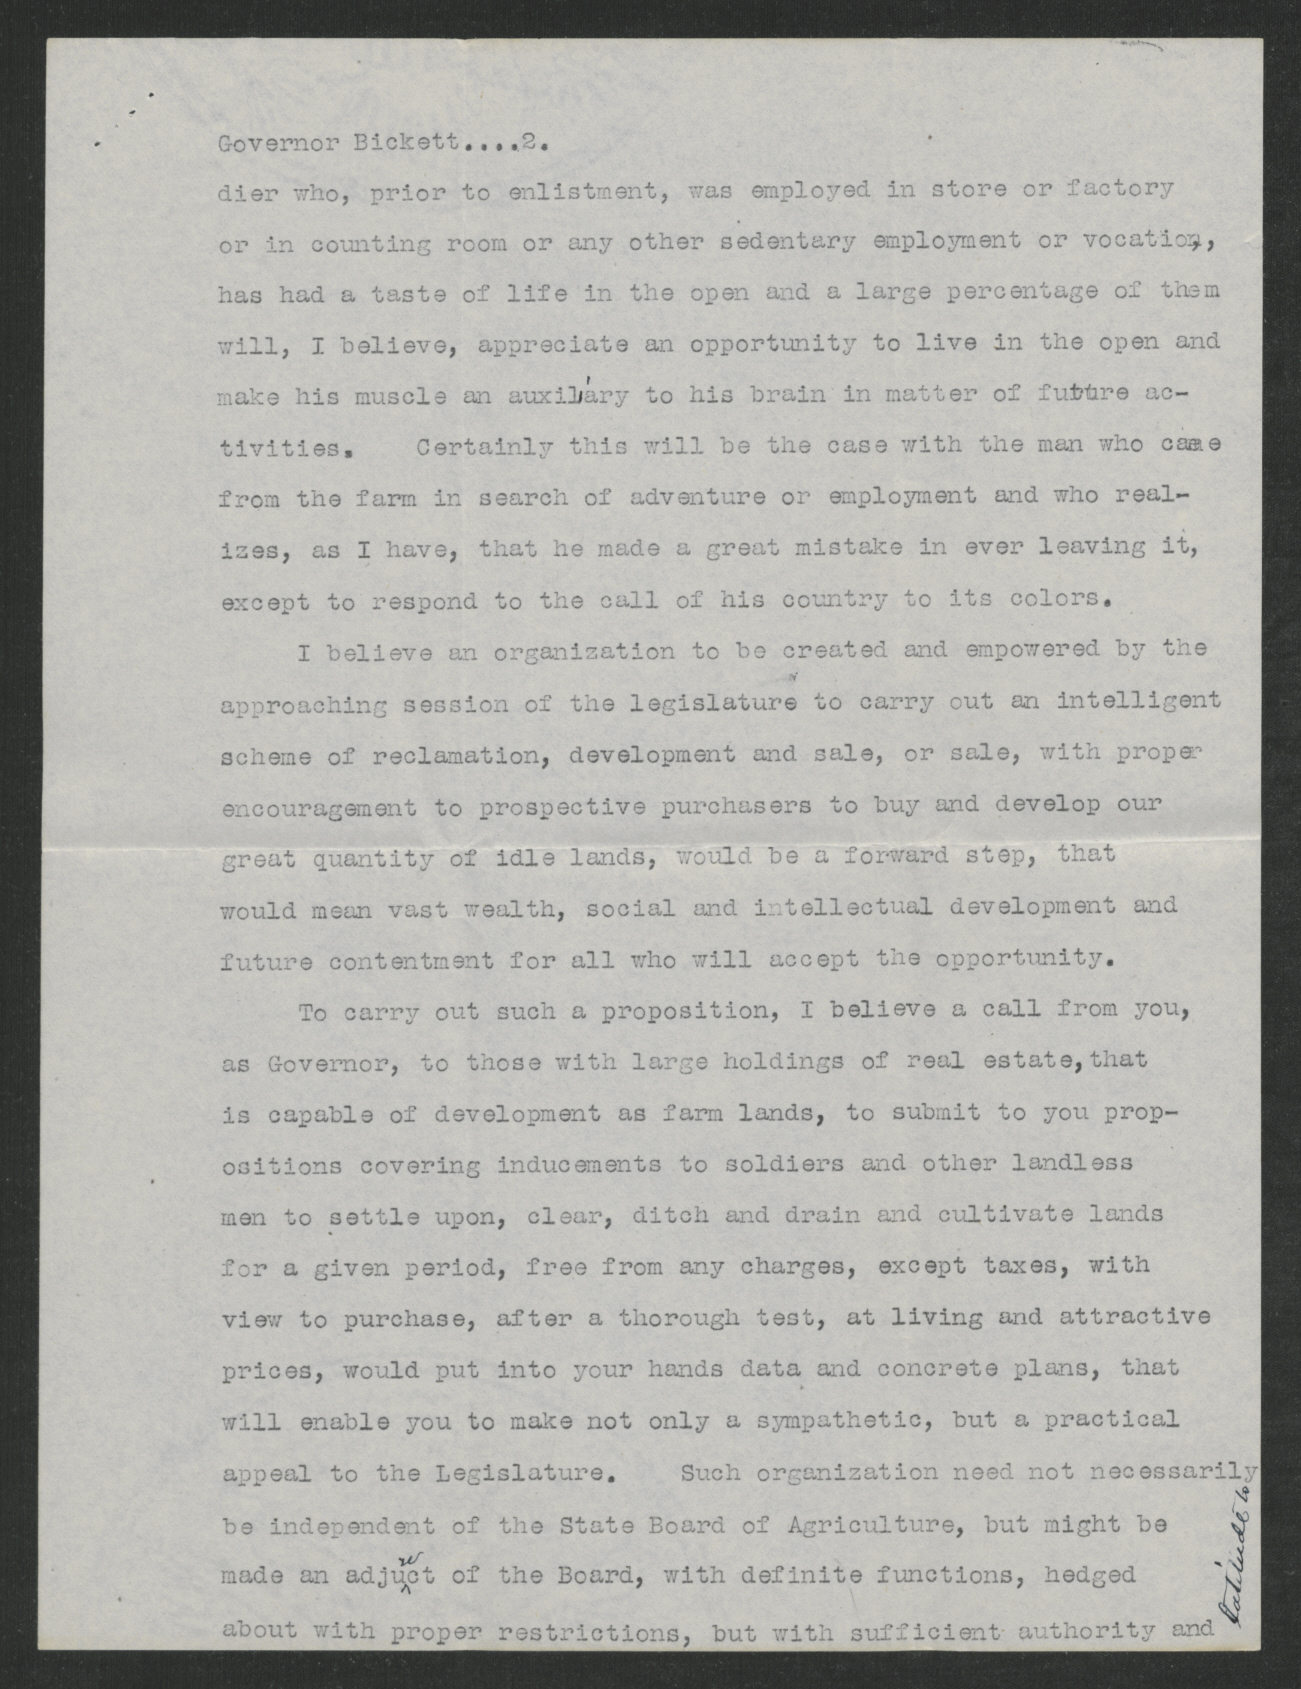 Letter from Samuel S. Mann to Thomas W. Bickett, December 16, 1918, page 2